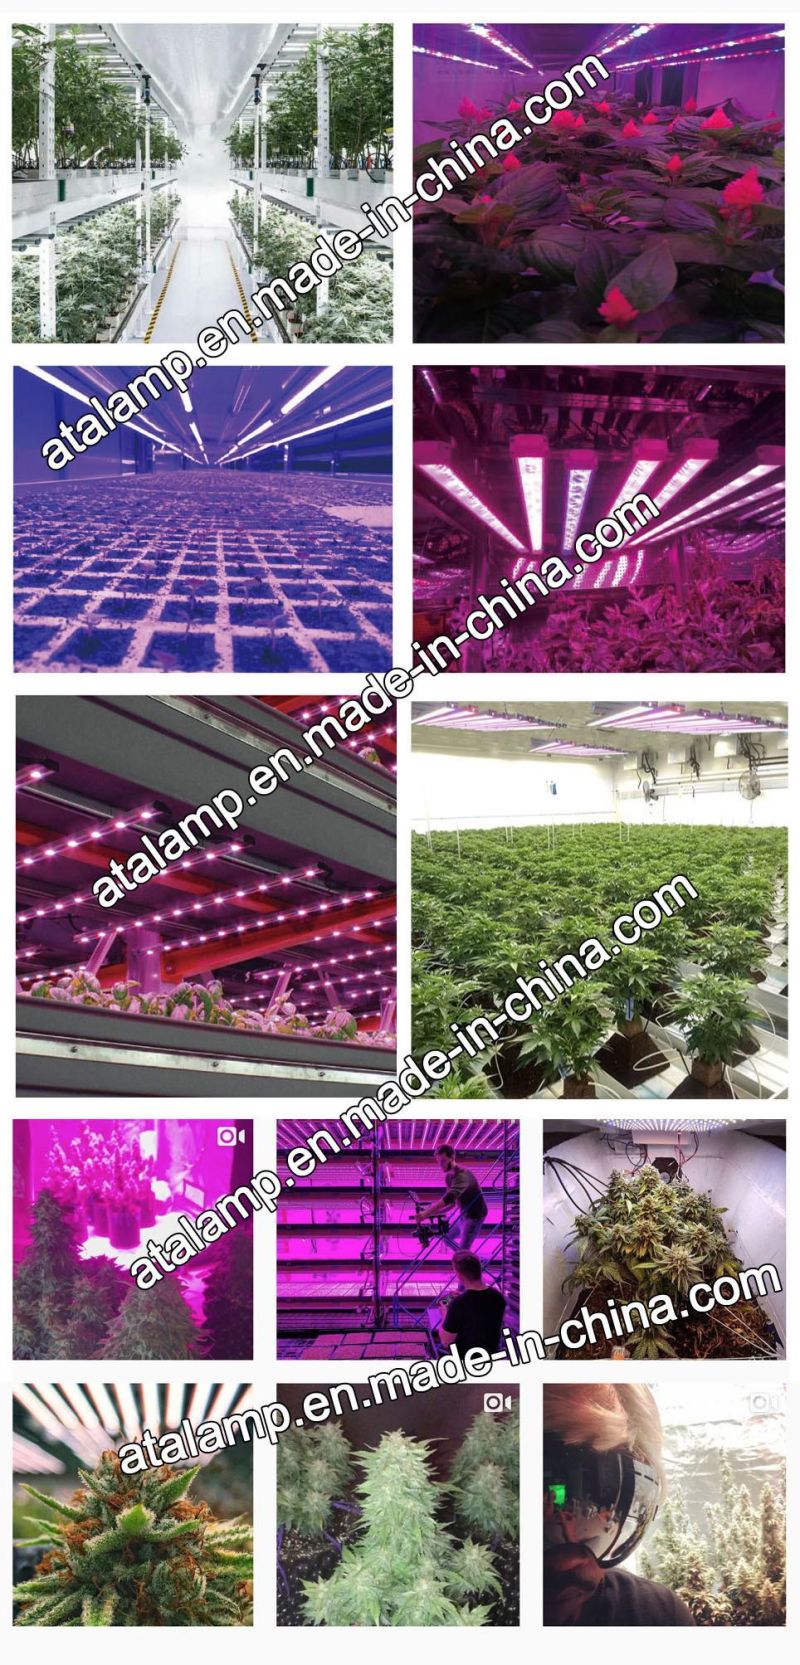 Full Spectrum 400W/600W/800W/1000W High Efficiency LED Grow Light Equipment for Greenhouse Plants Growing Veg/ Blooming